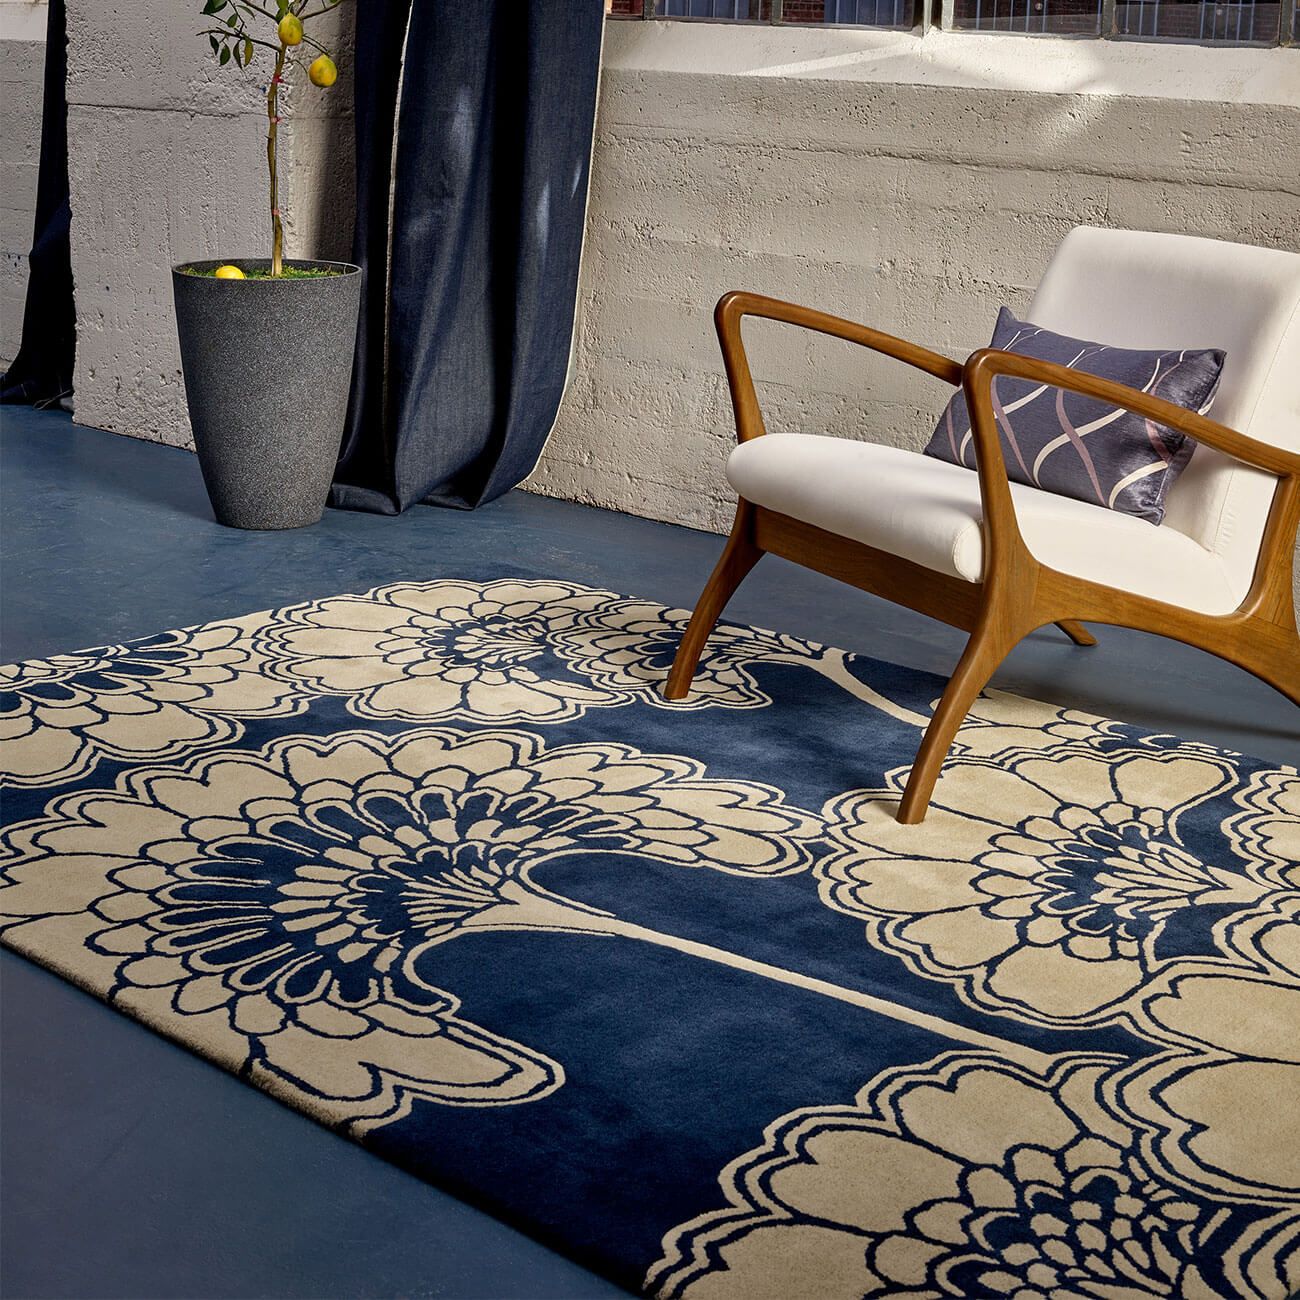 Unveil Elegance with Our Luxurious Rugs